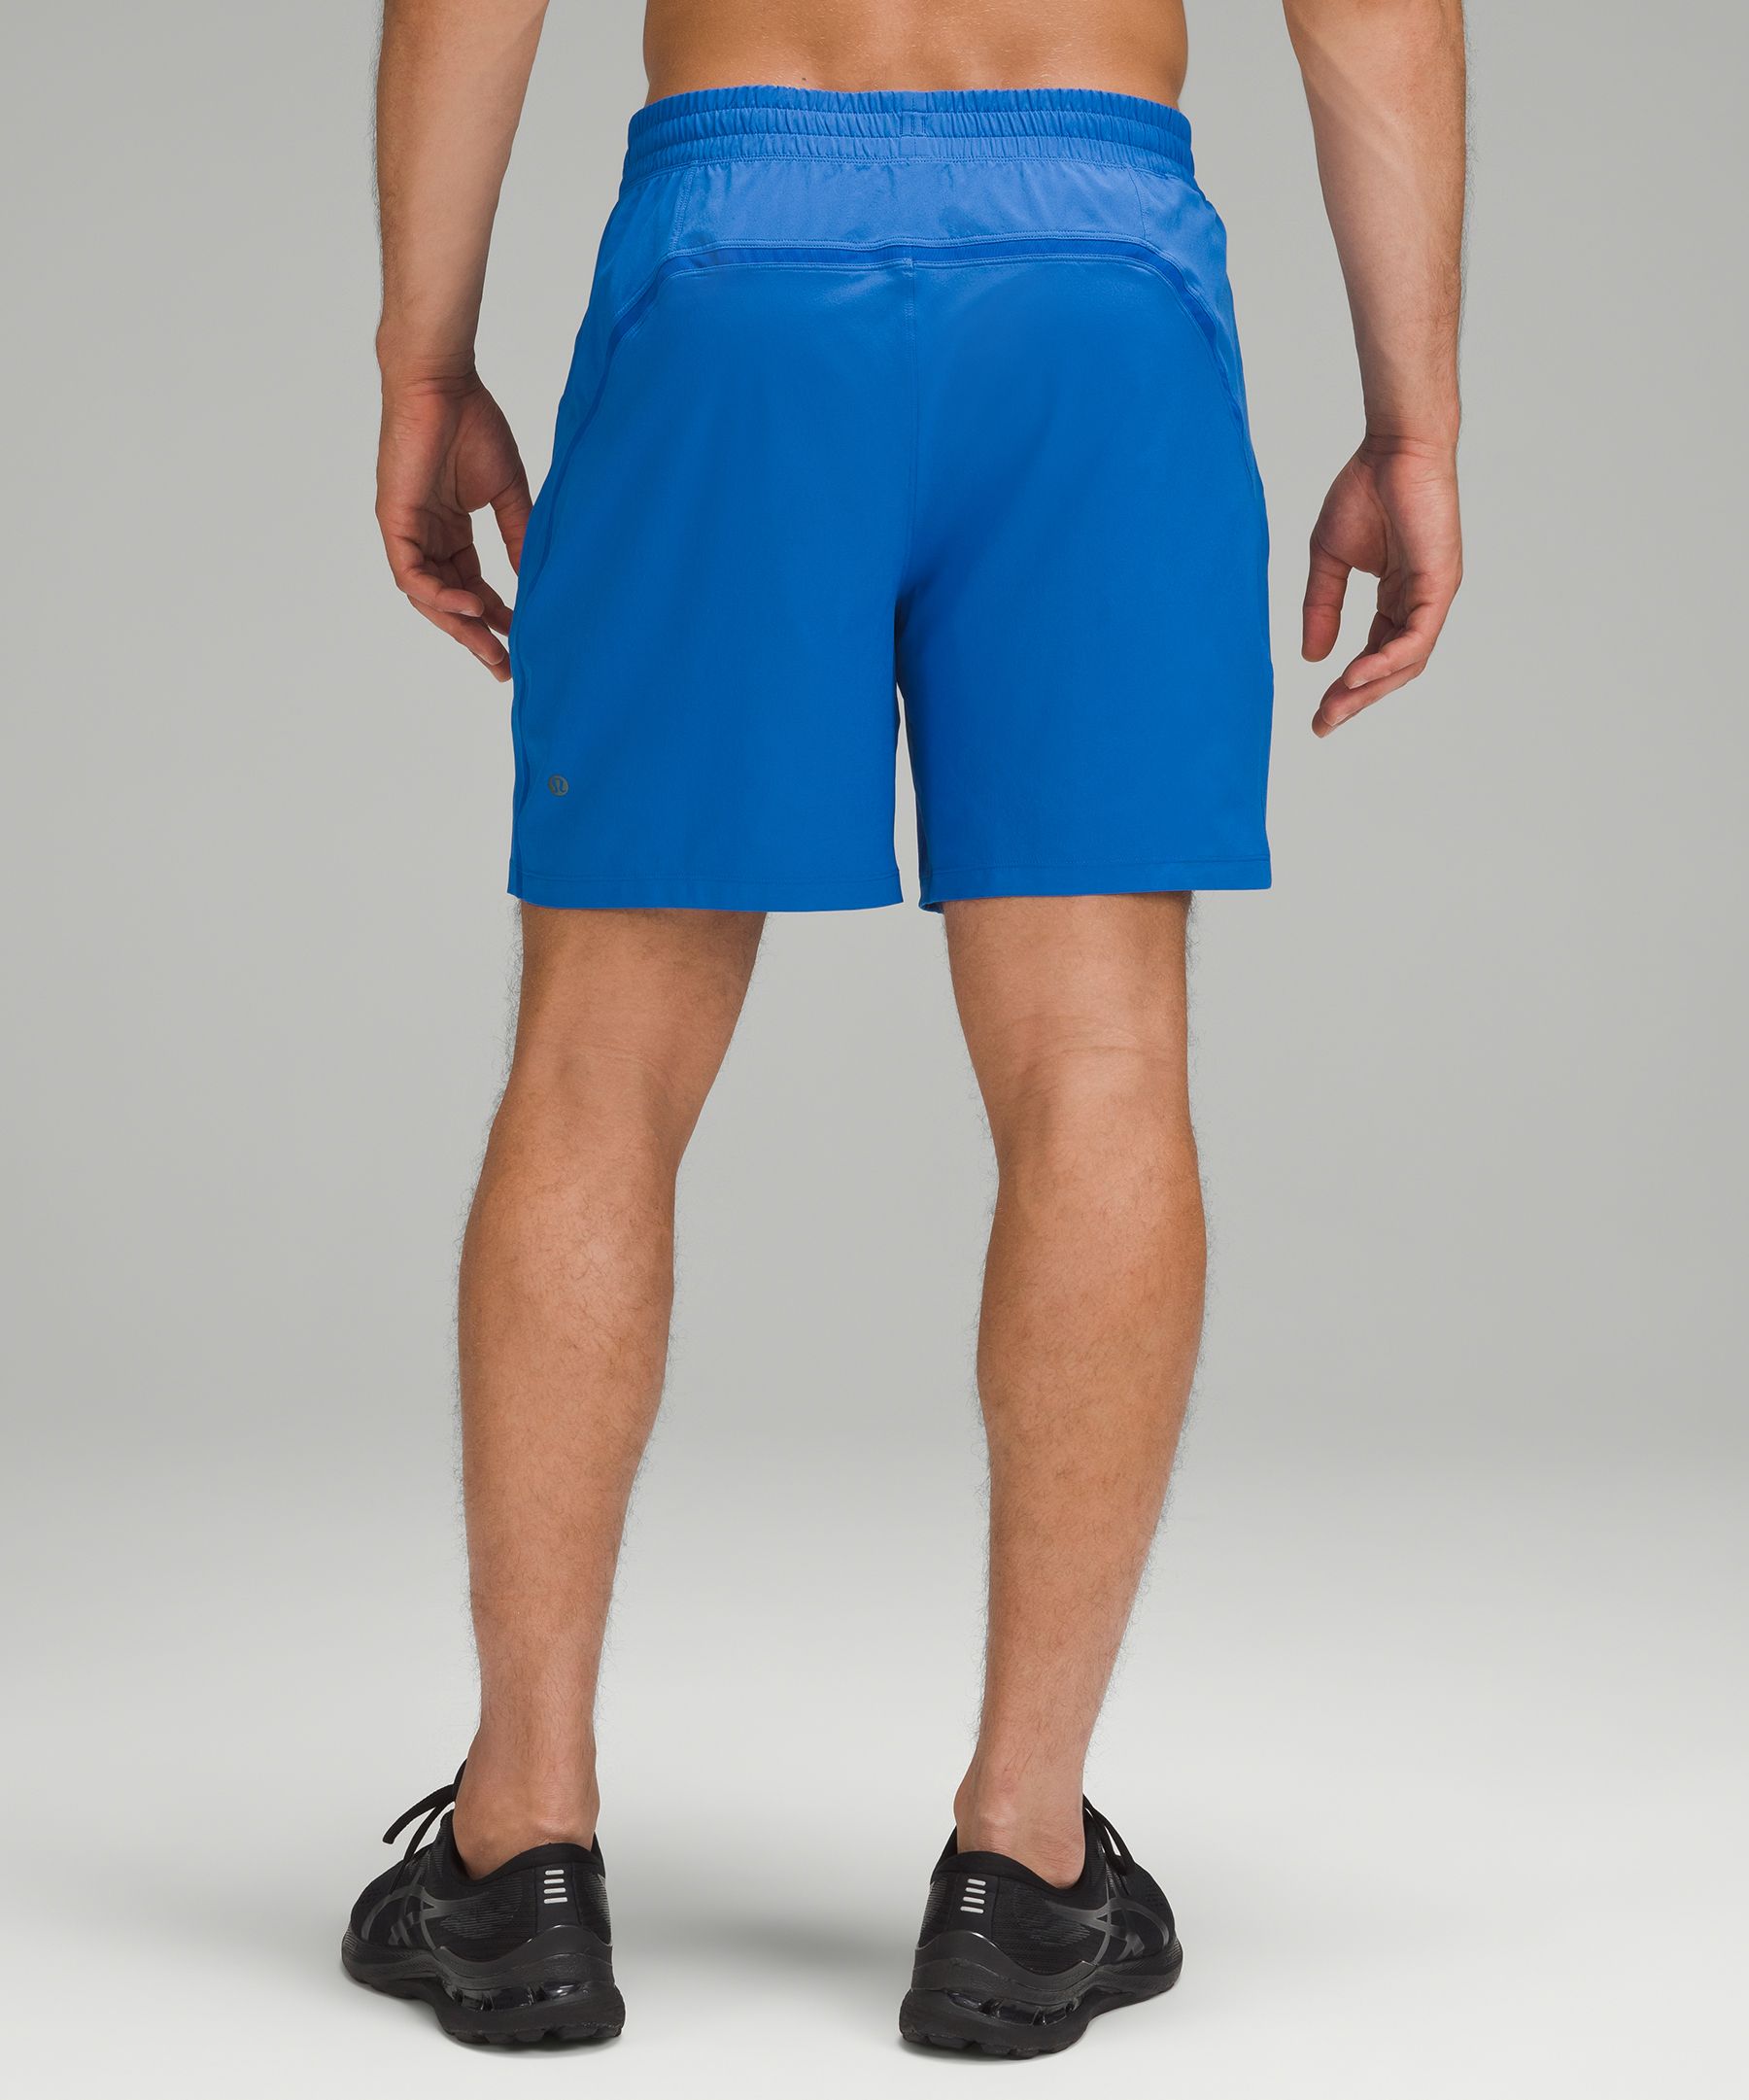 Lululemon Run Times Short *2-way stretch - Wee Wheezy Check Bleached Coral  Cadet Blue / Black